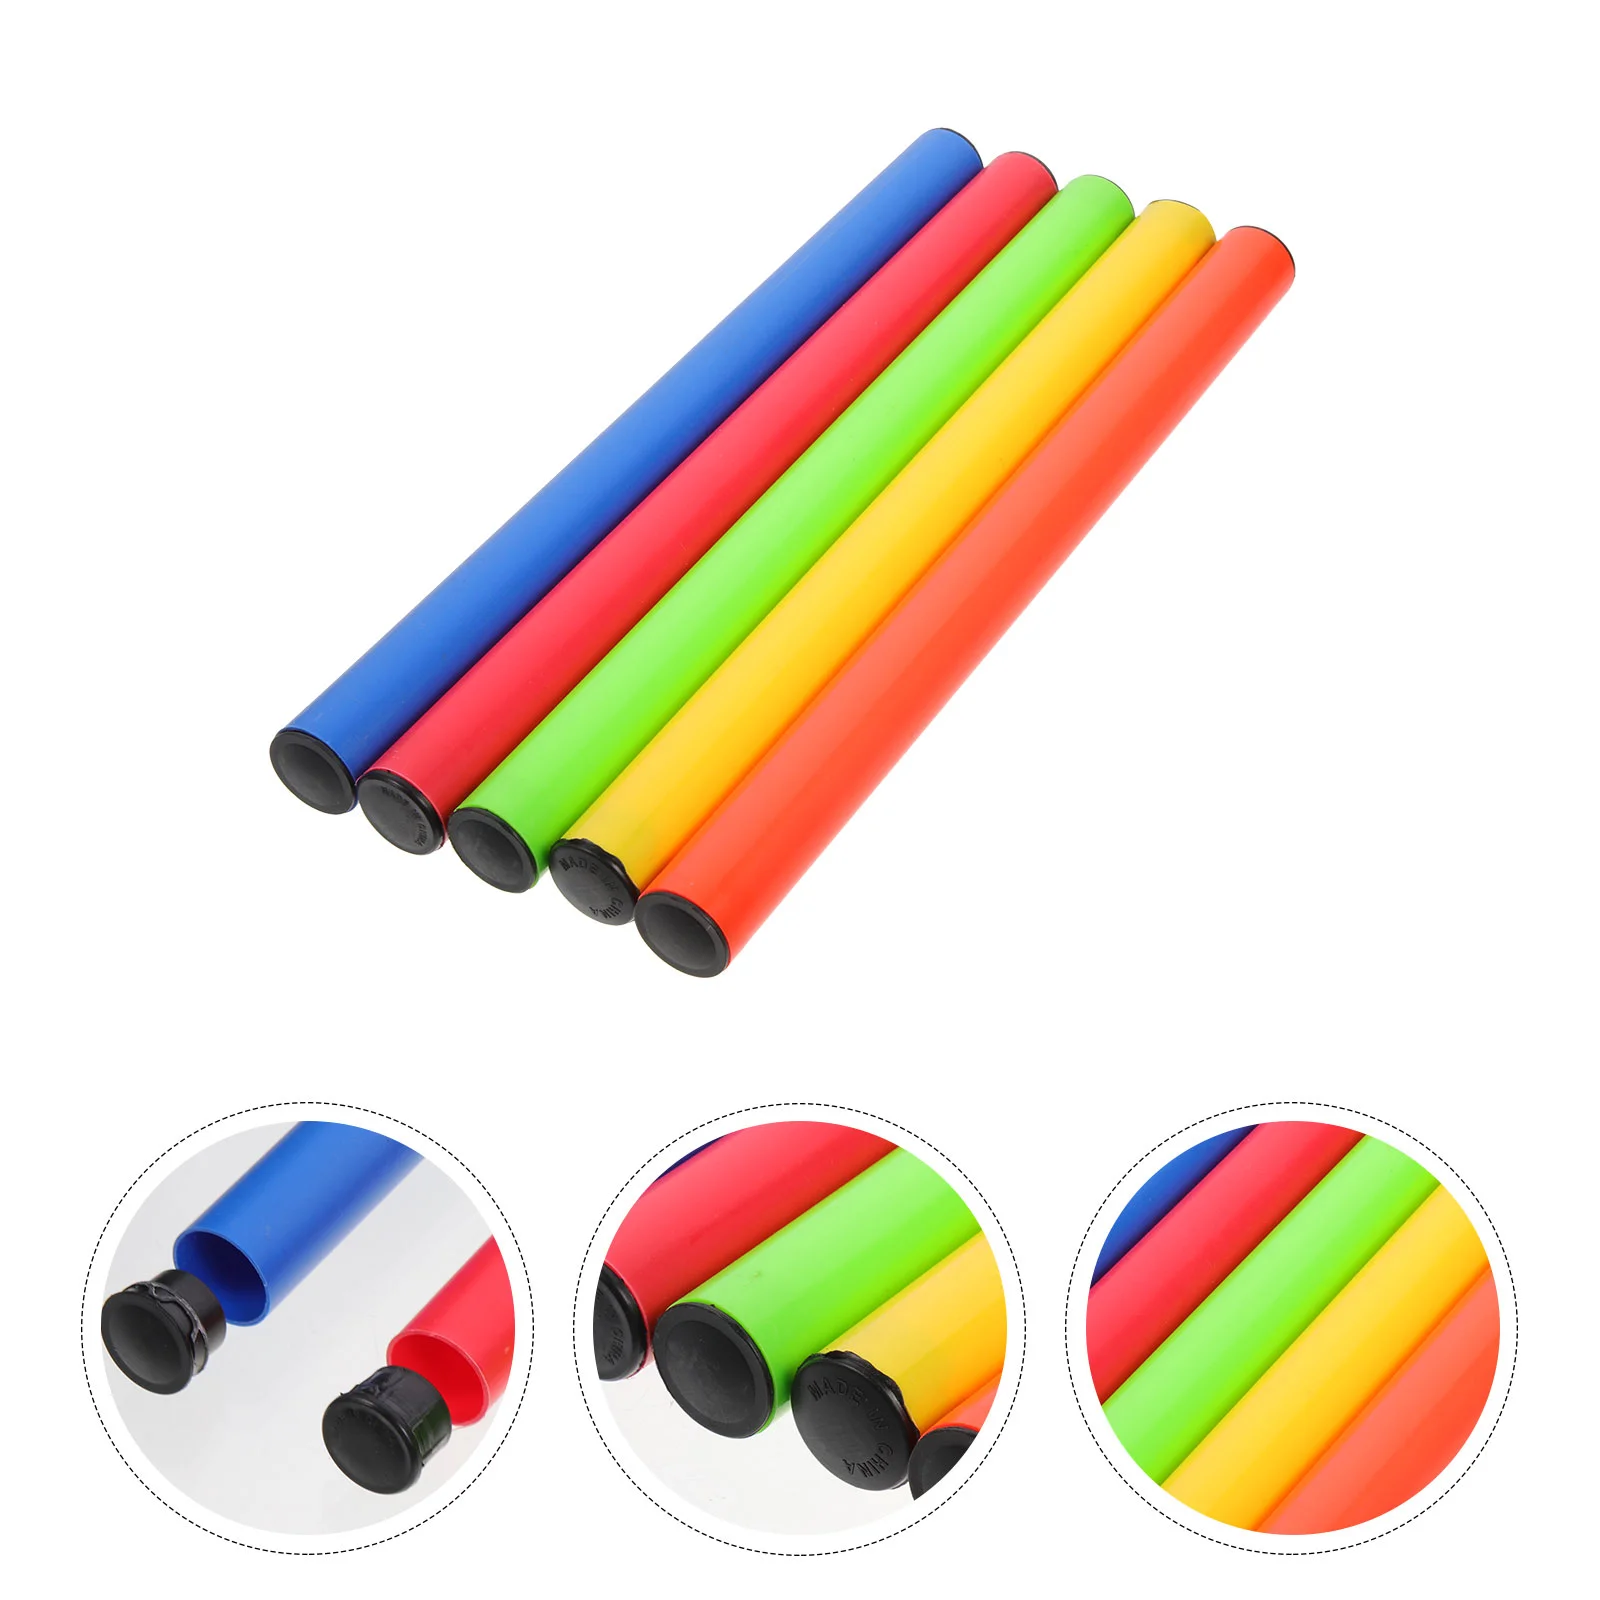 

5 Pcs Relay Race Supply Relaying Stick Field Tools Sports Sticks Track Transfer Competition Kids